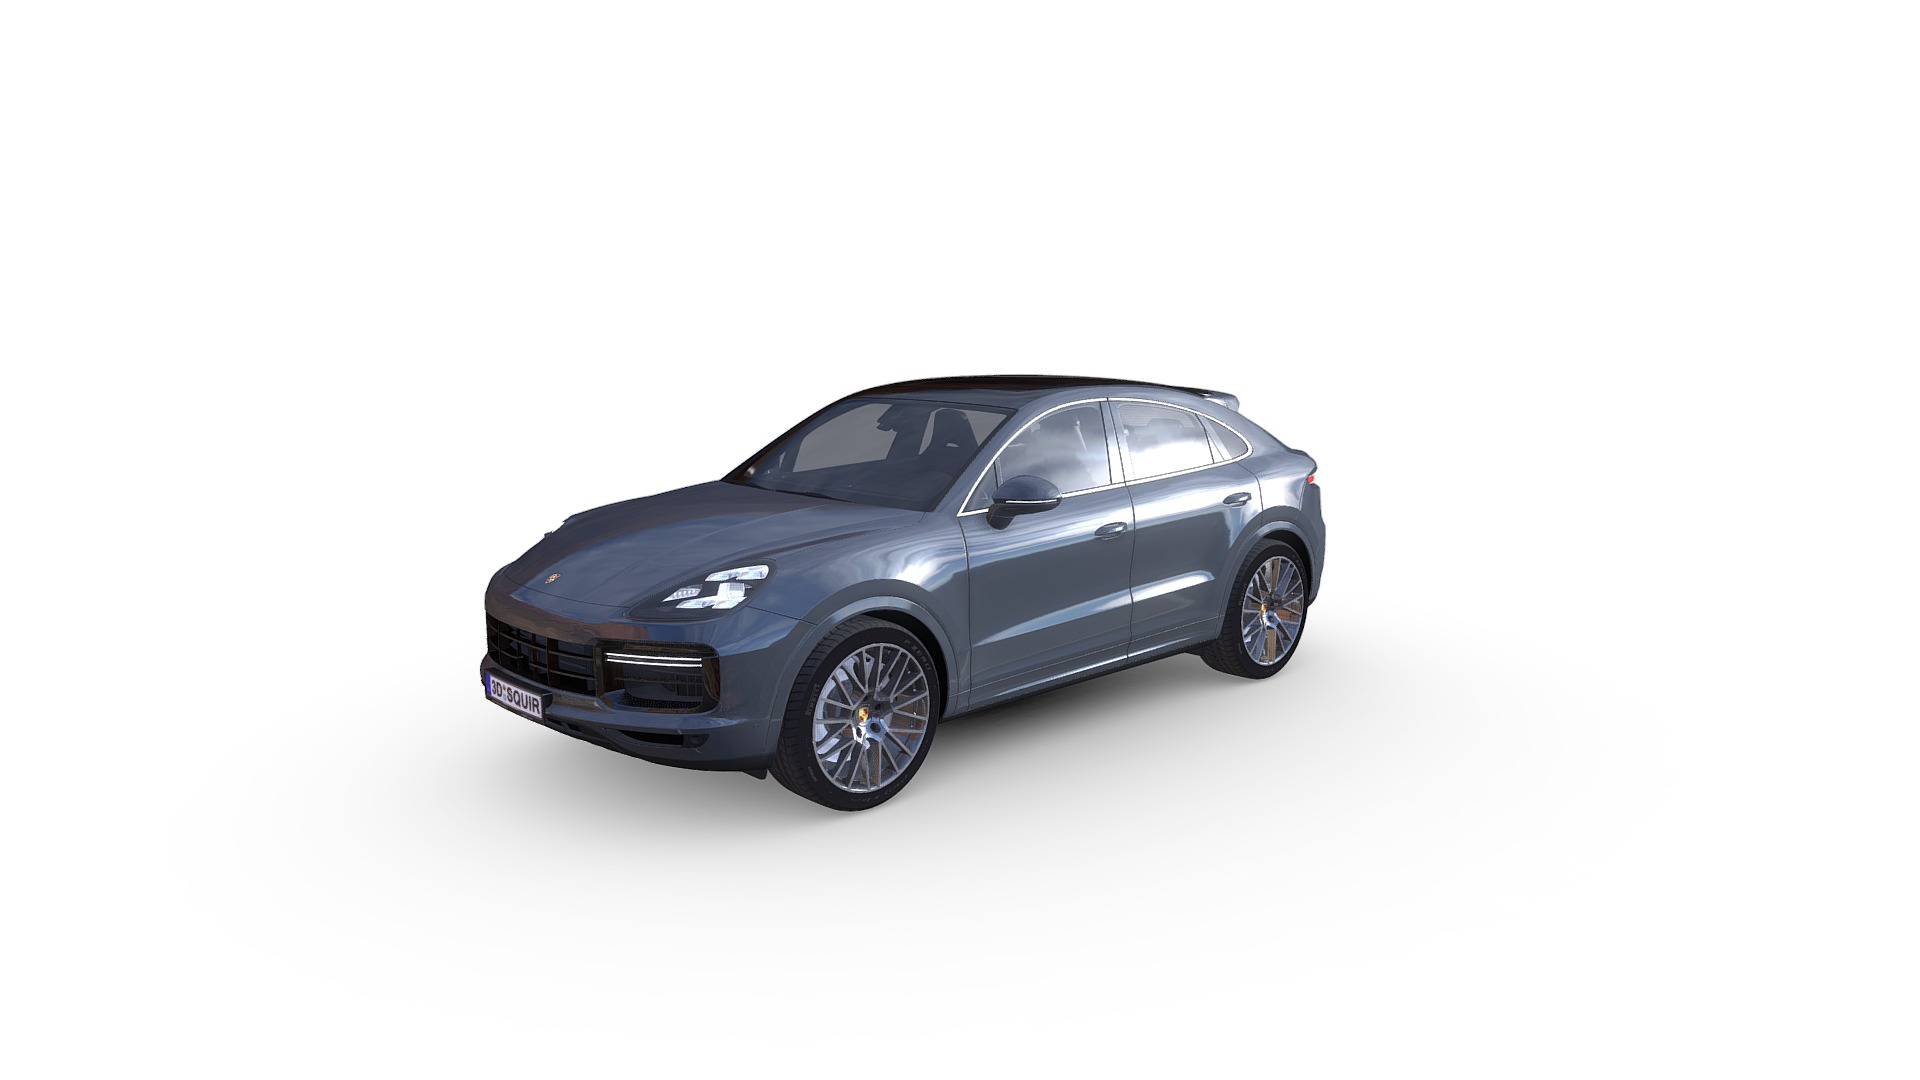 3D model Porsche Cayenne Turbo Coupe 2020 - This is a 3D model of the Porsche Cayenne Turbo Coupe 2020. The 3D model is about a car parked with its front facing the camera.